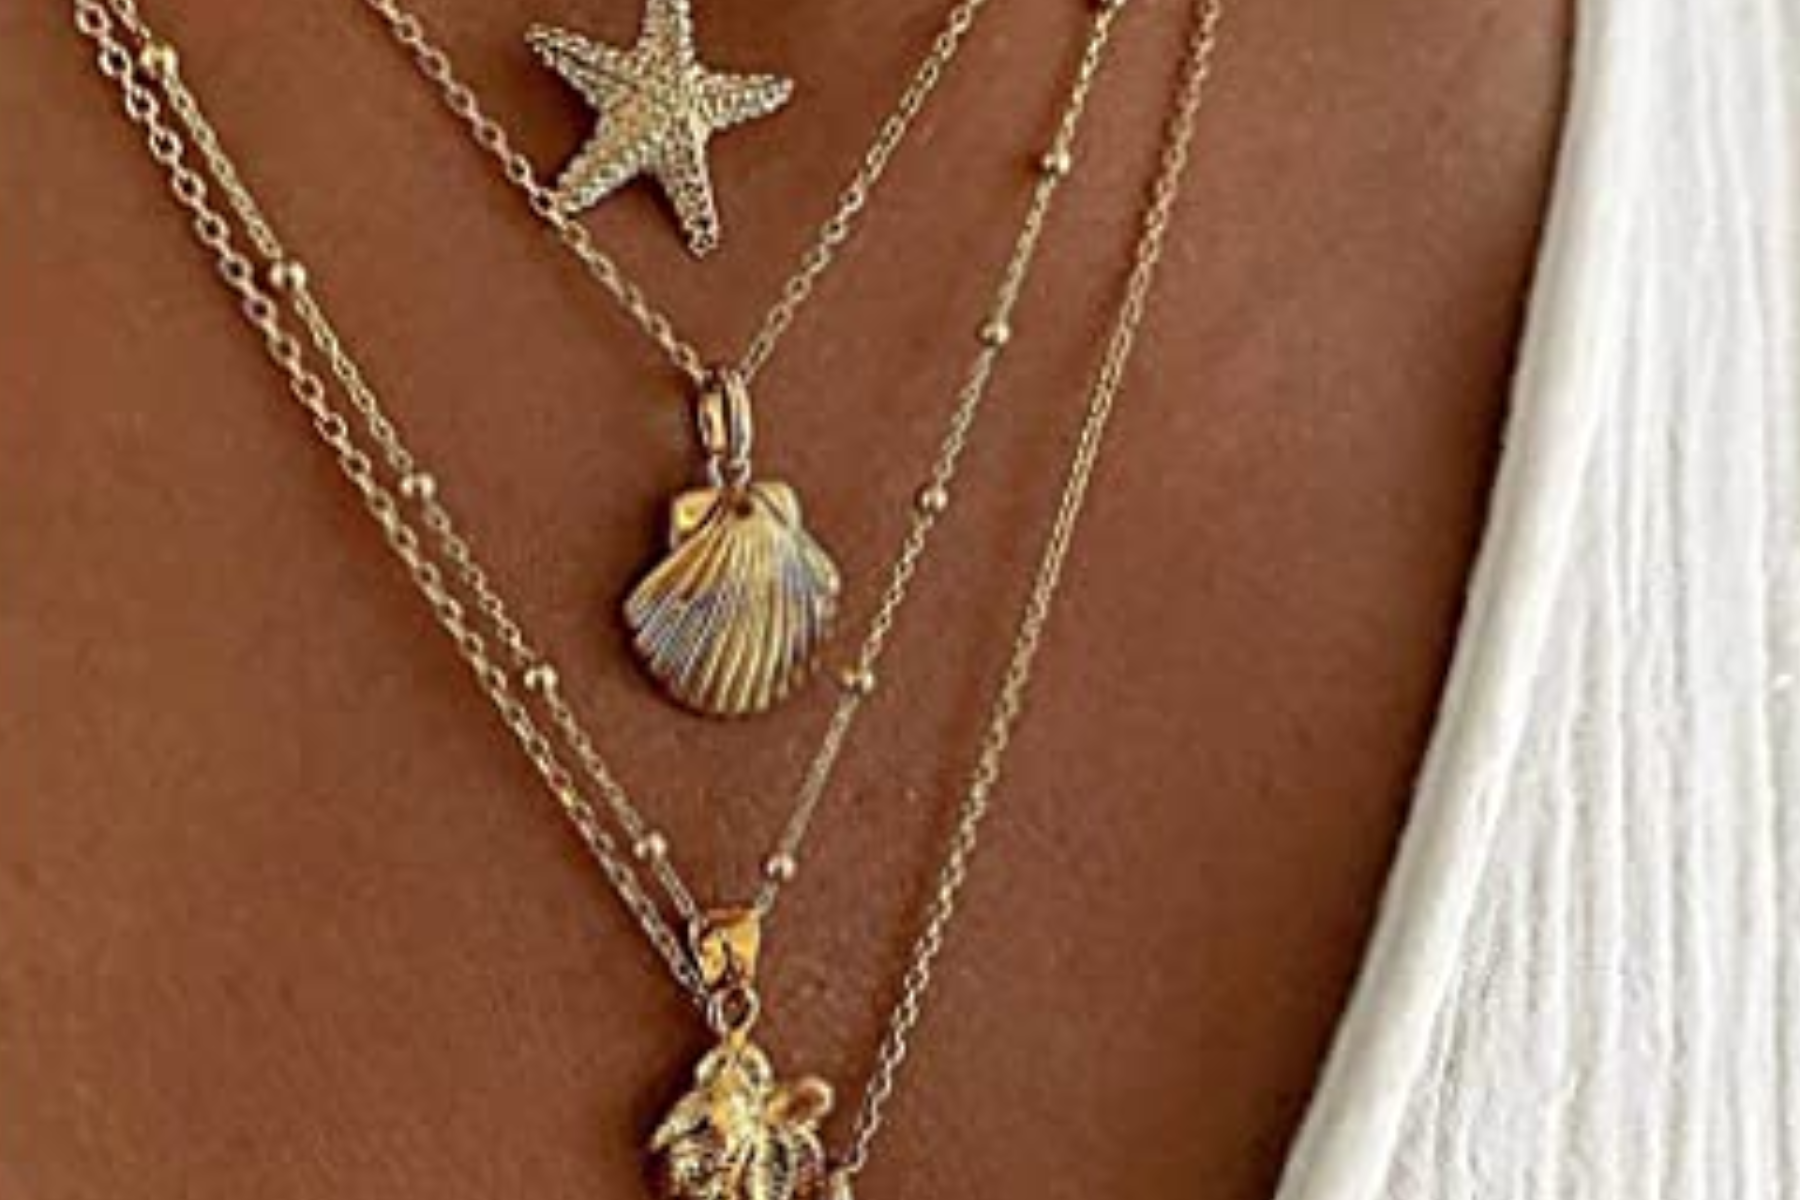 A close-up of a woman's neck and chest area, showing her wearing multiple shell pendant necklaces layered on top of each other